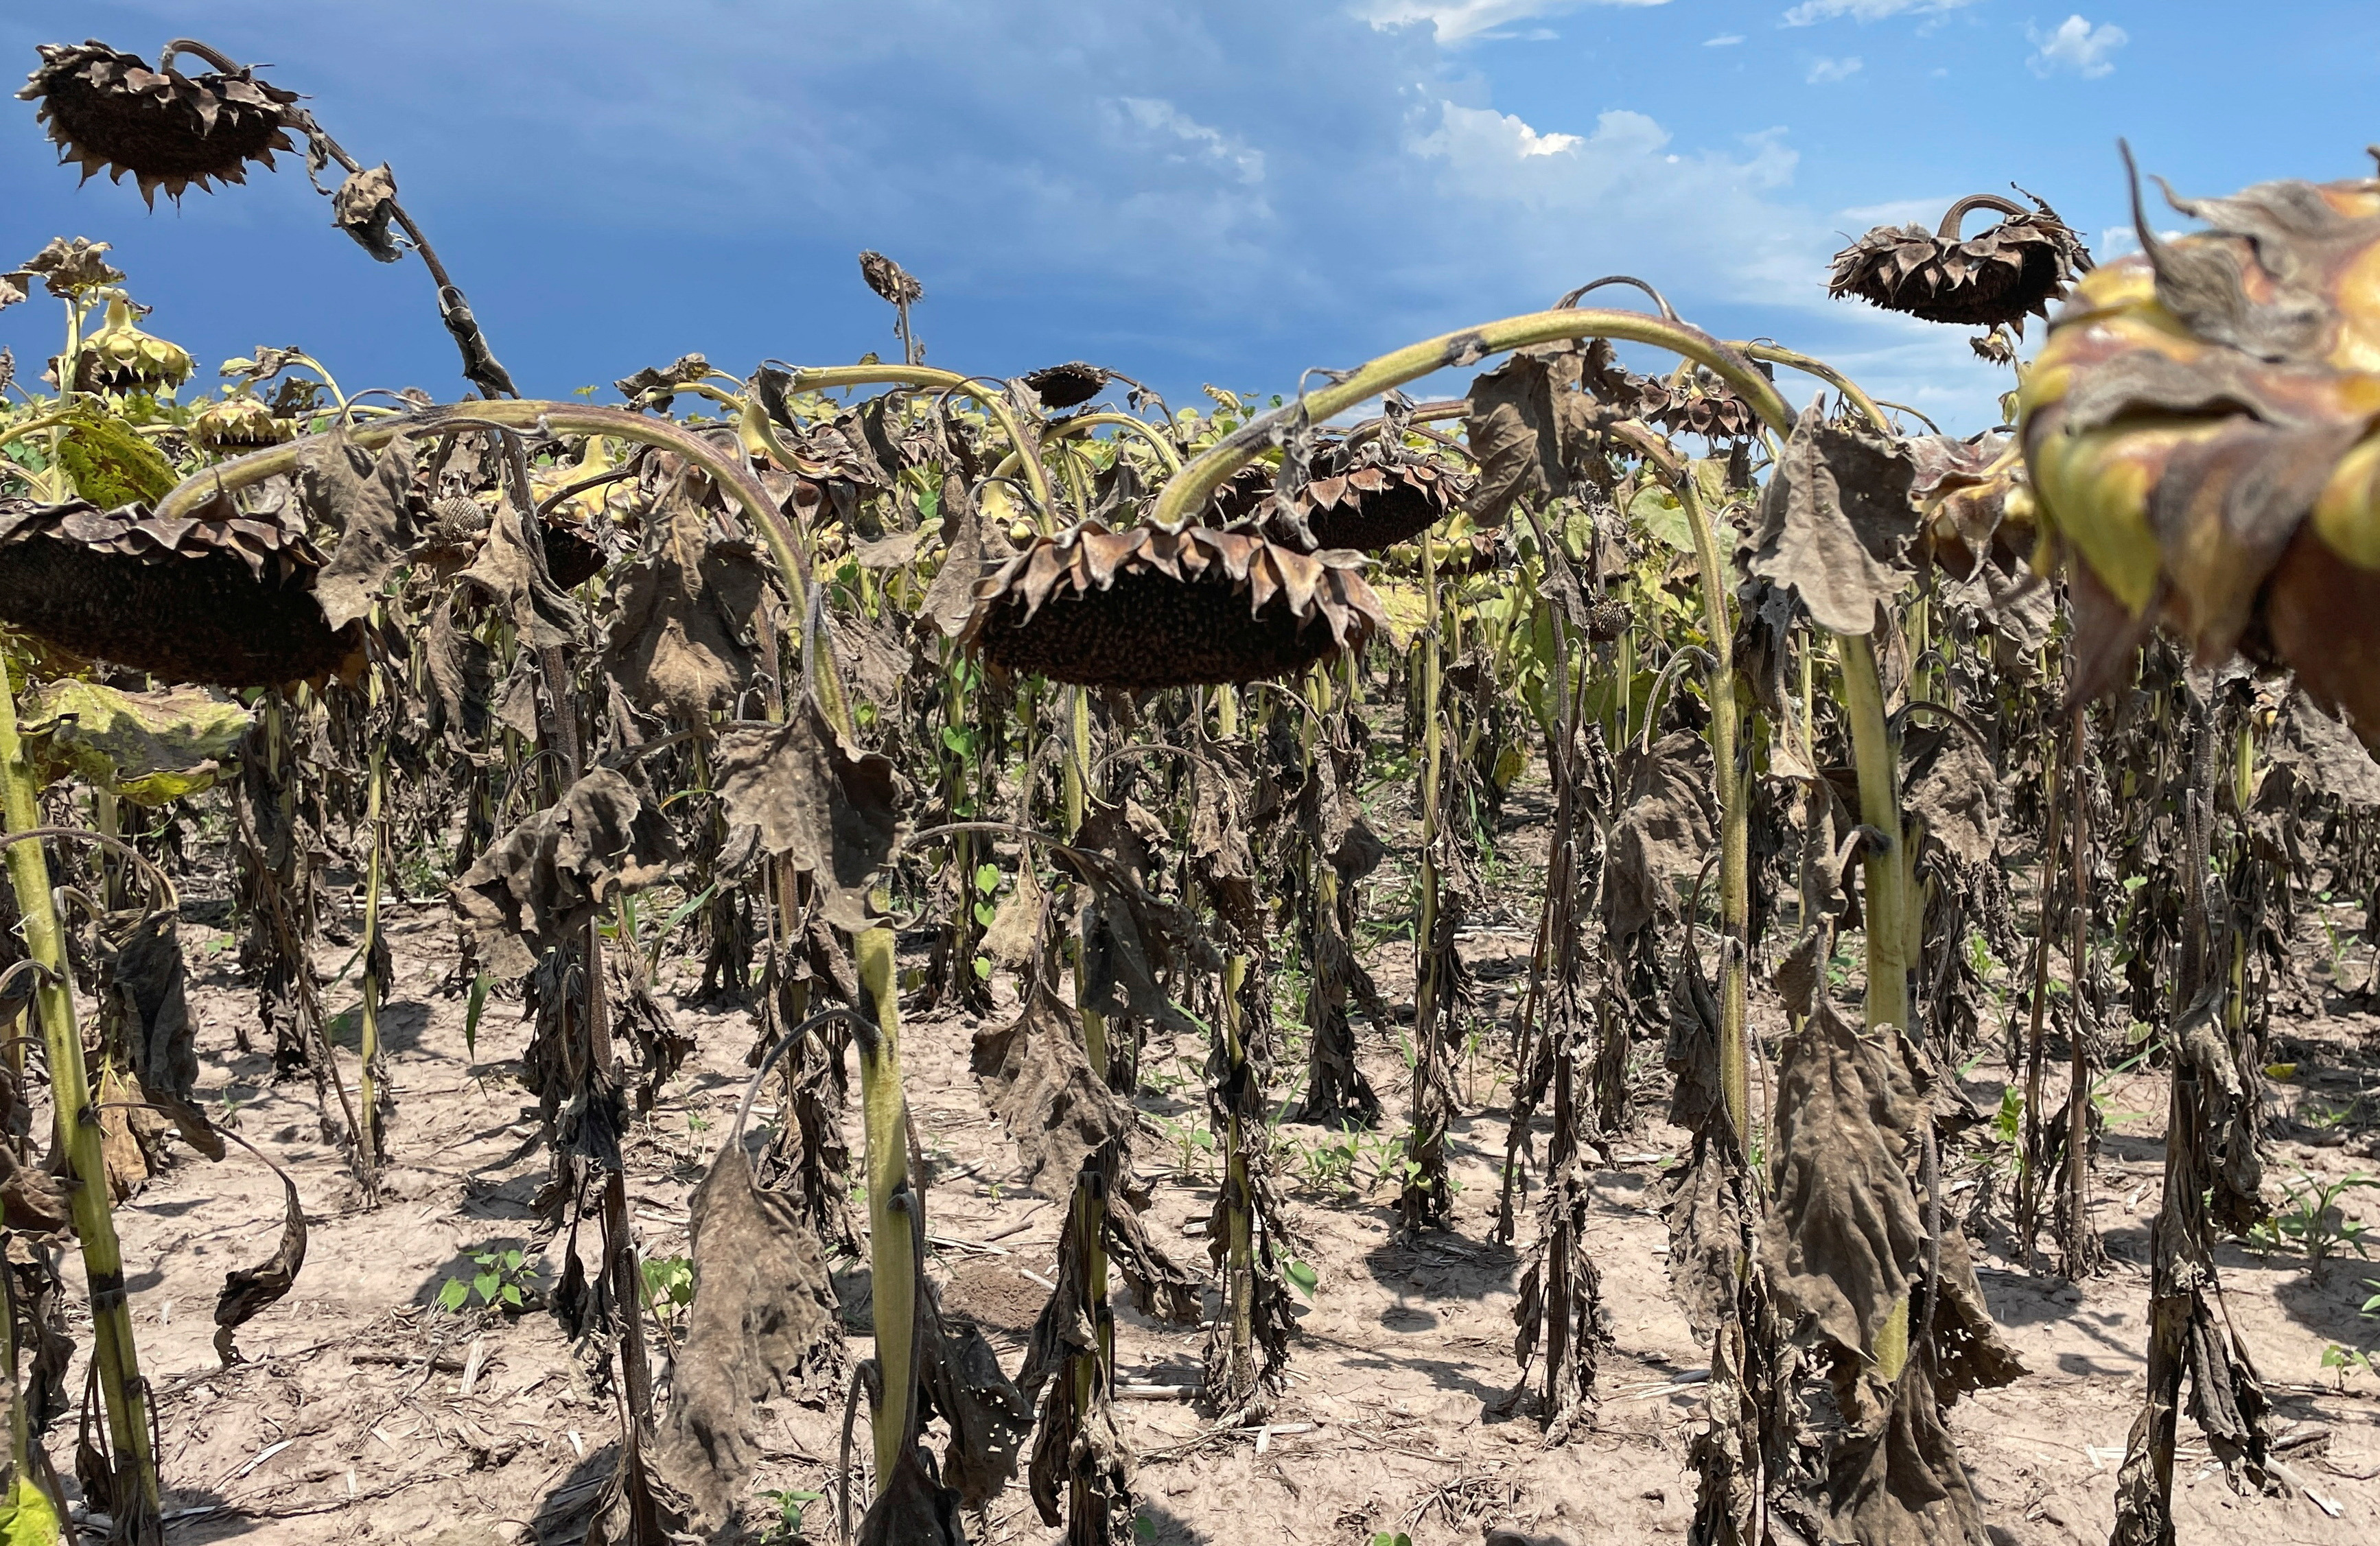 Argentina's drought-hit fields, billion dollar losses and farmers going under